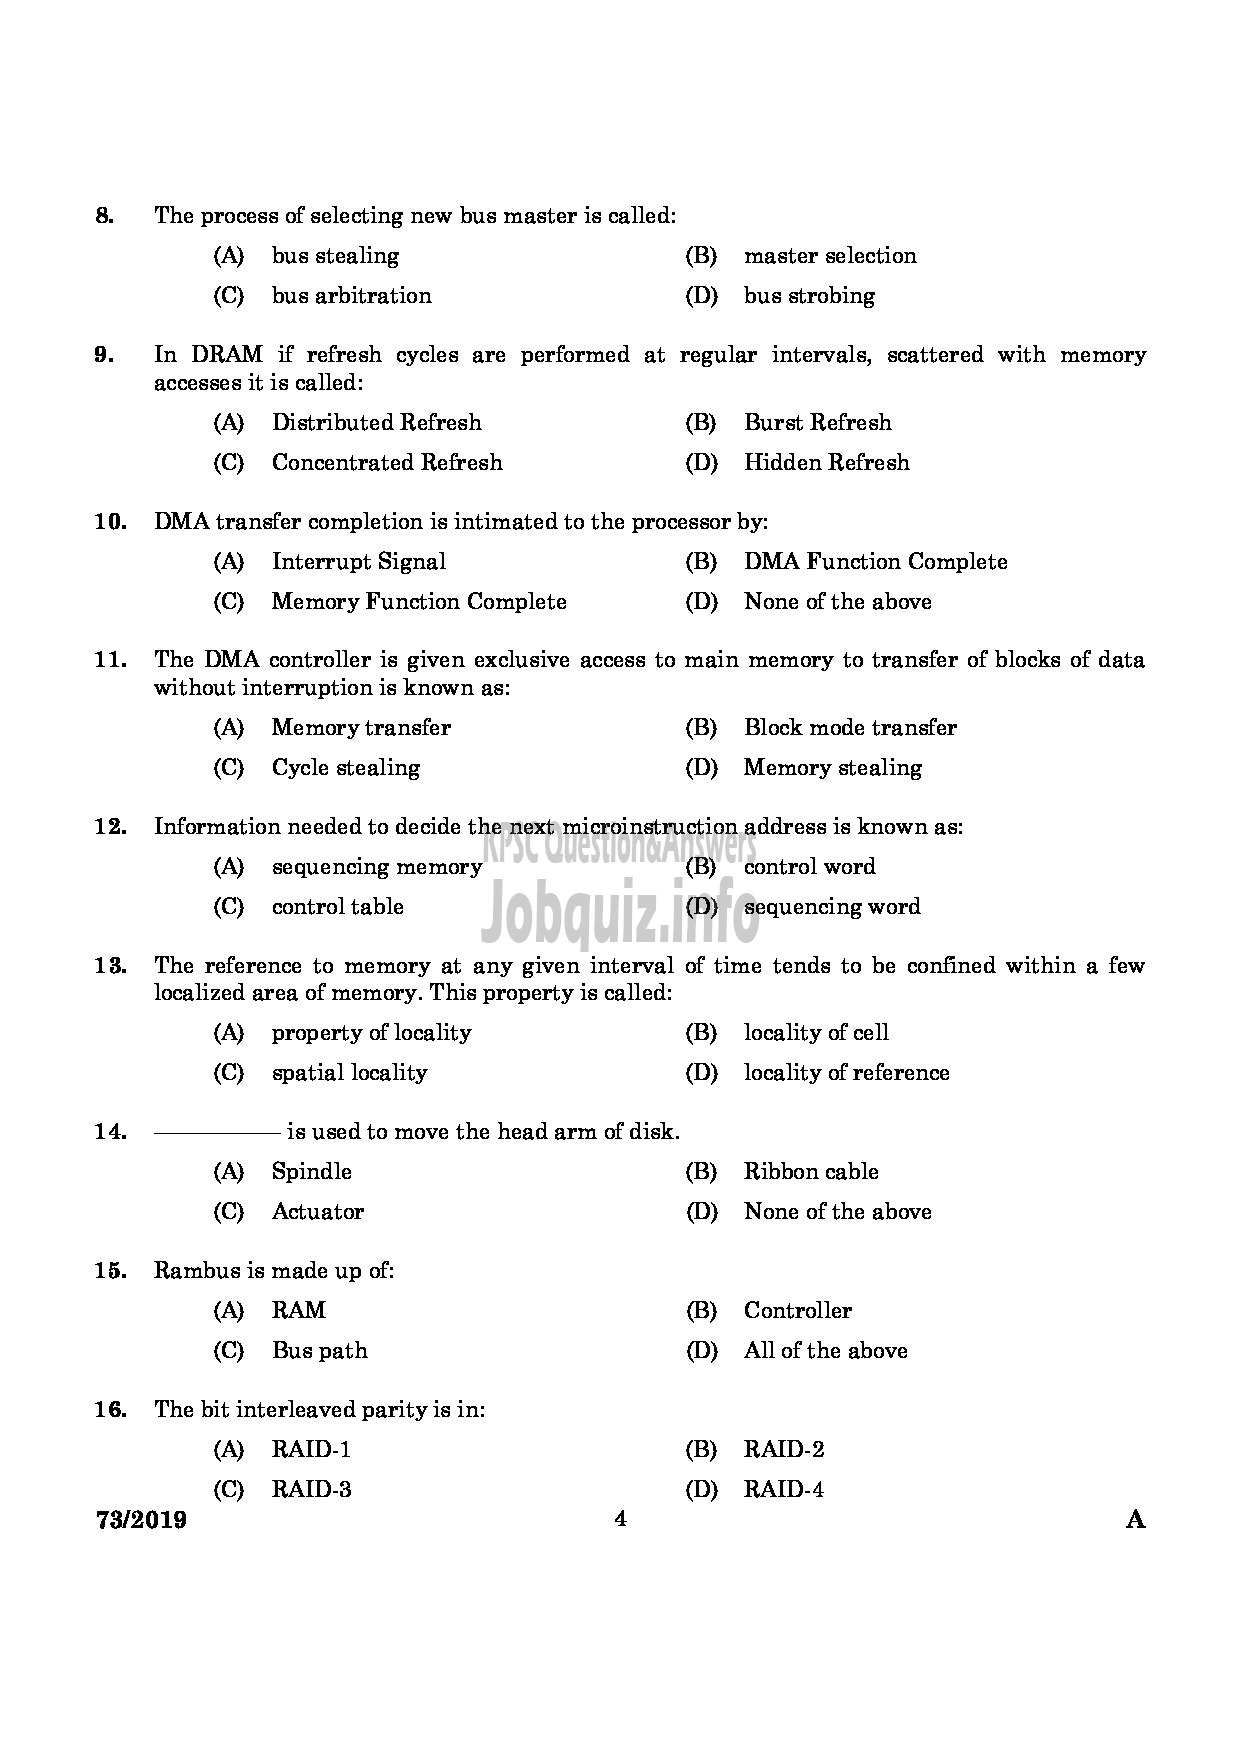 Kerala PSC Question Paper - Junior Instructor (Multimedia Animation And Special Effects) In Industrial Deve Dept English -2